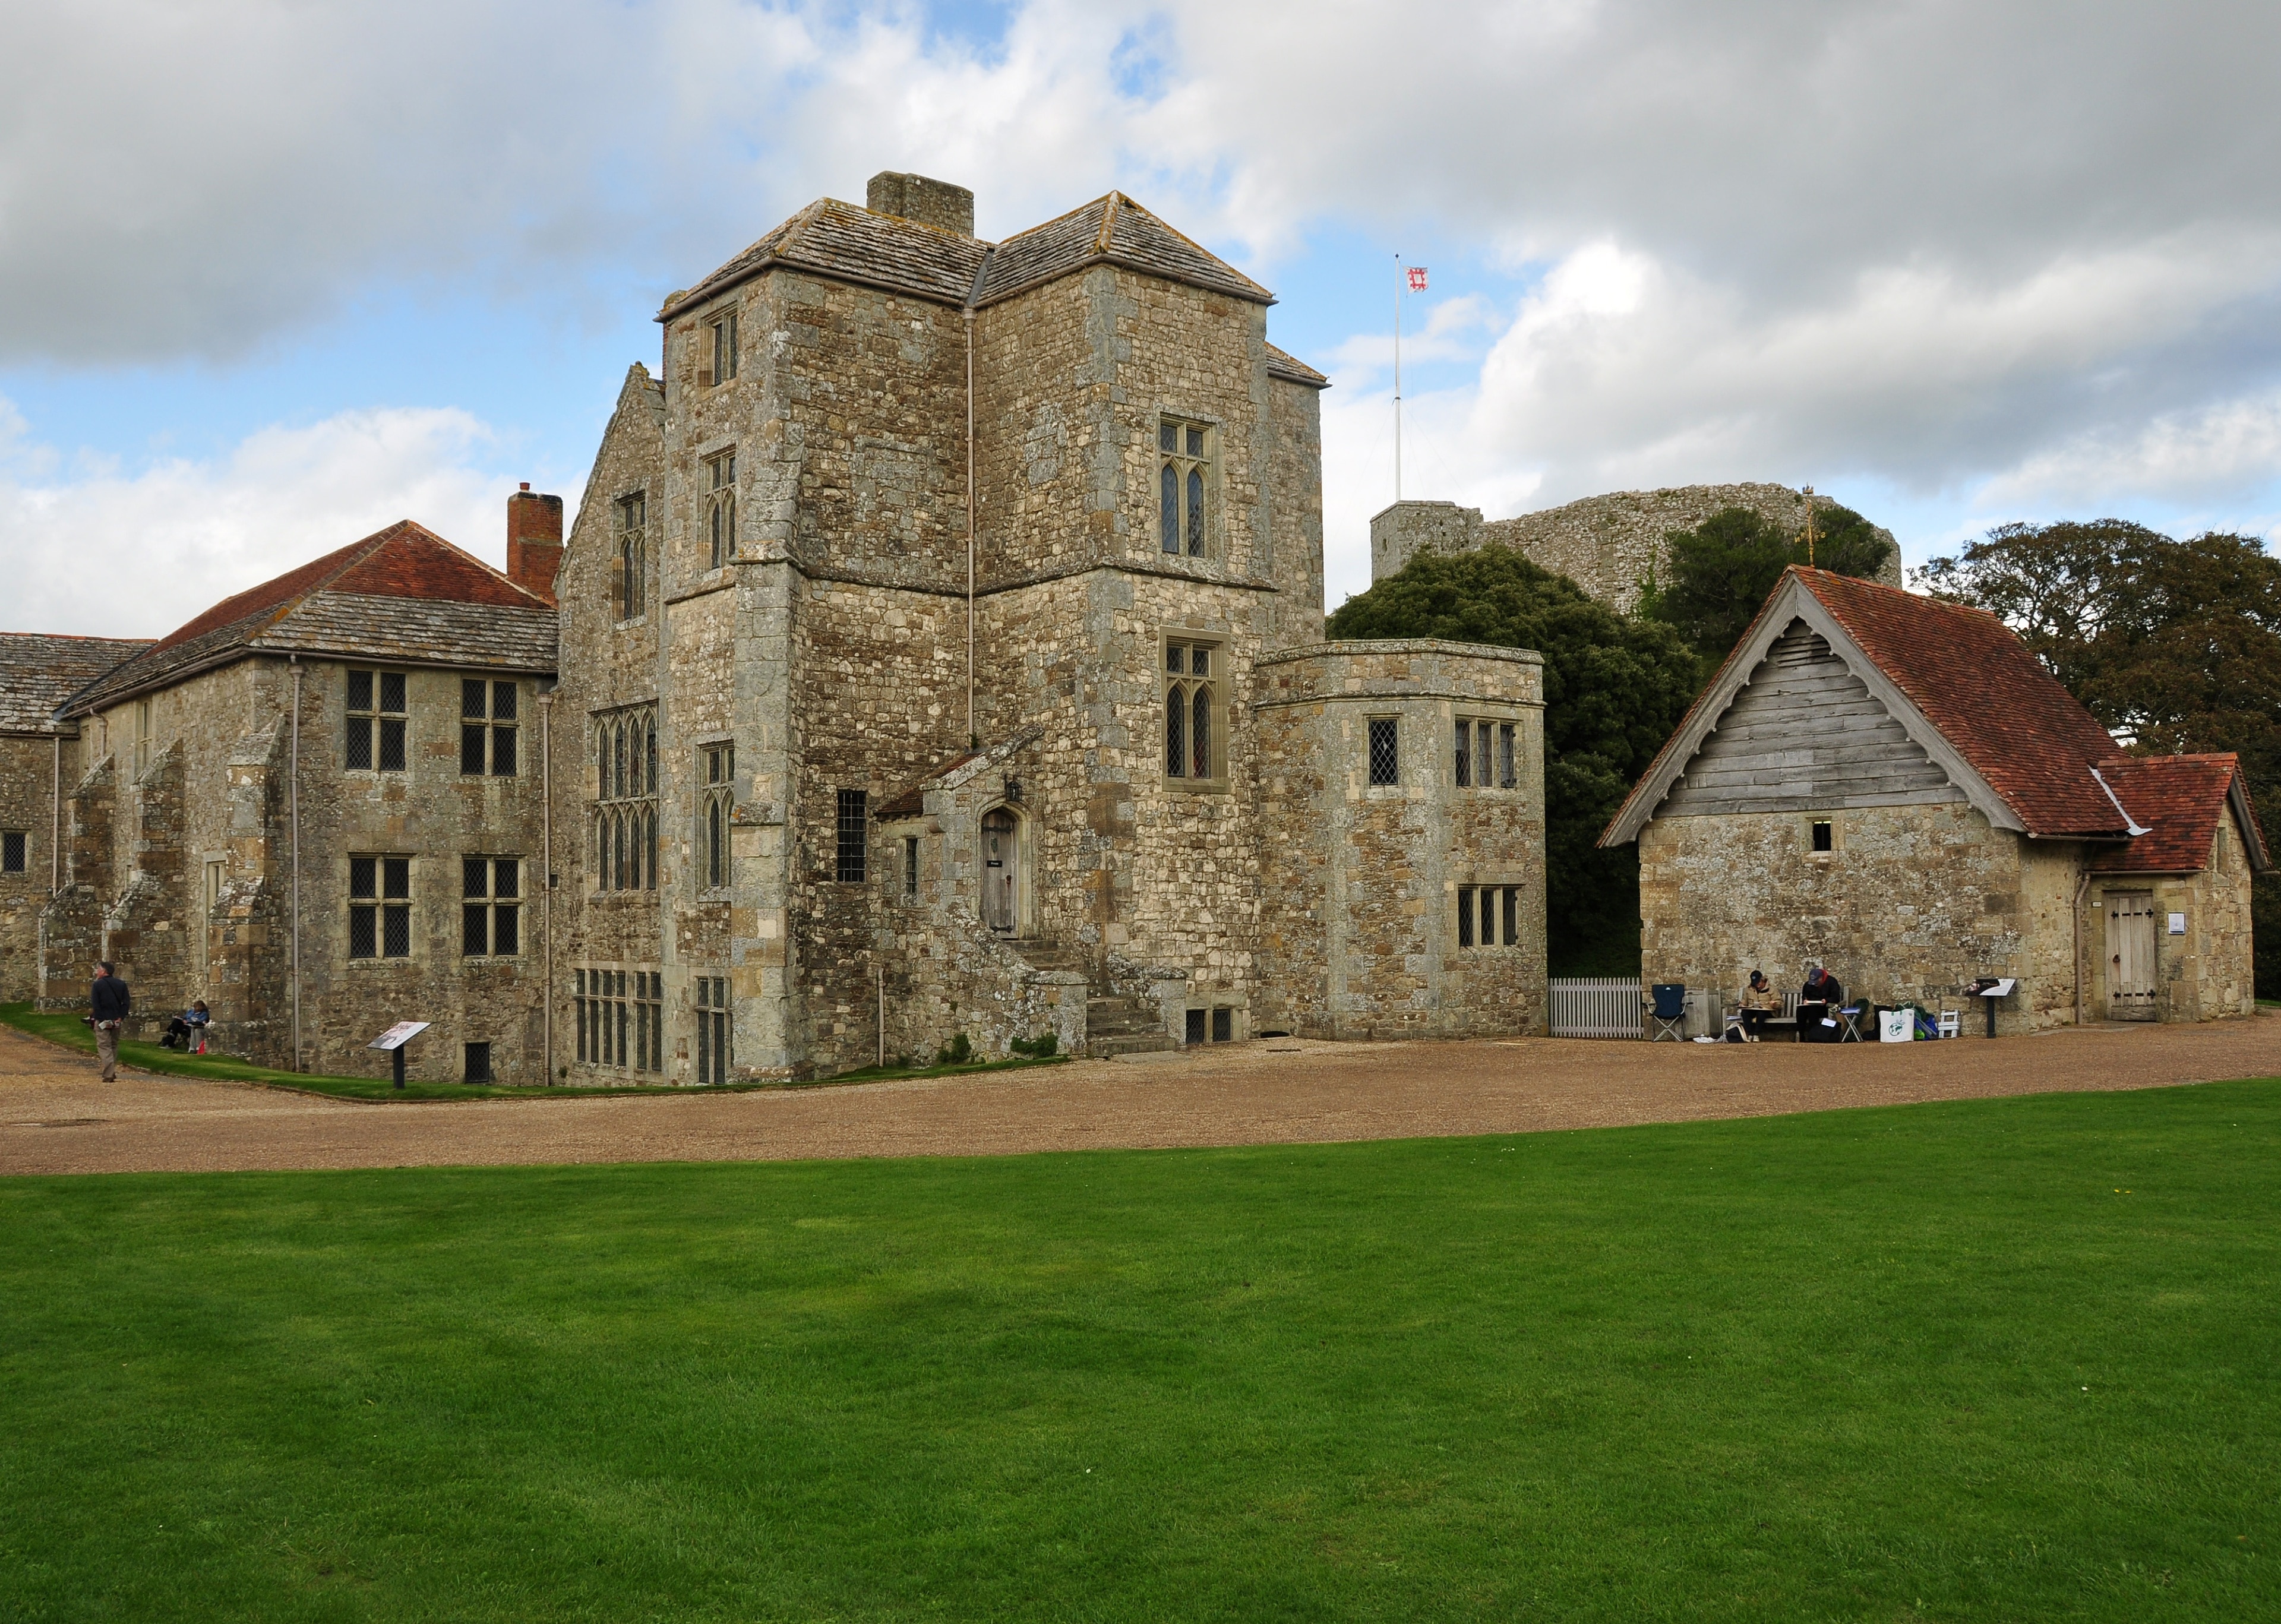 The Governor's House in Carisbrooke Castle on the Isle of Wight.